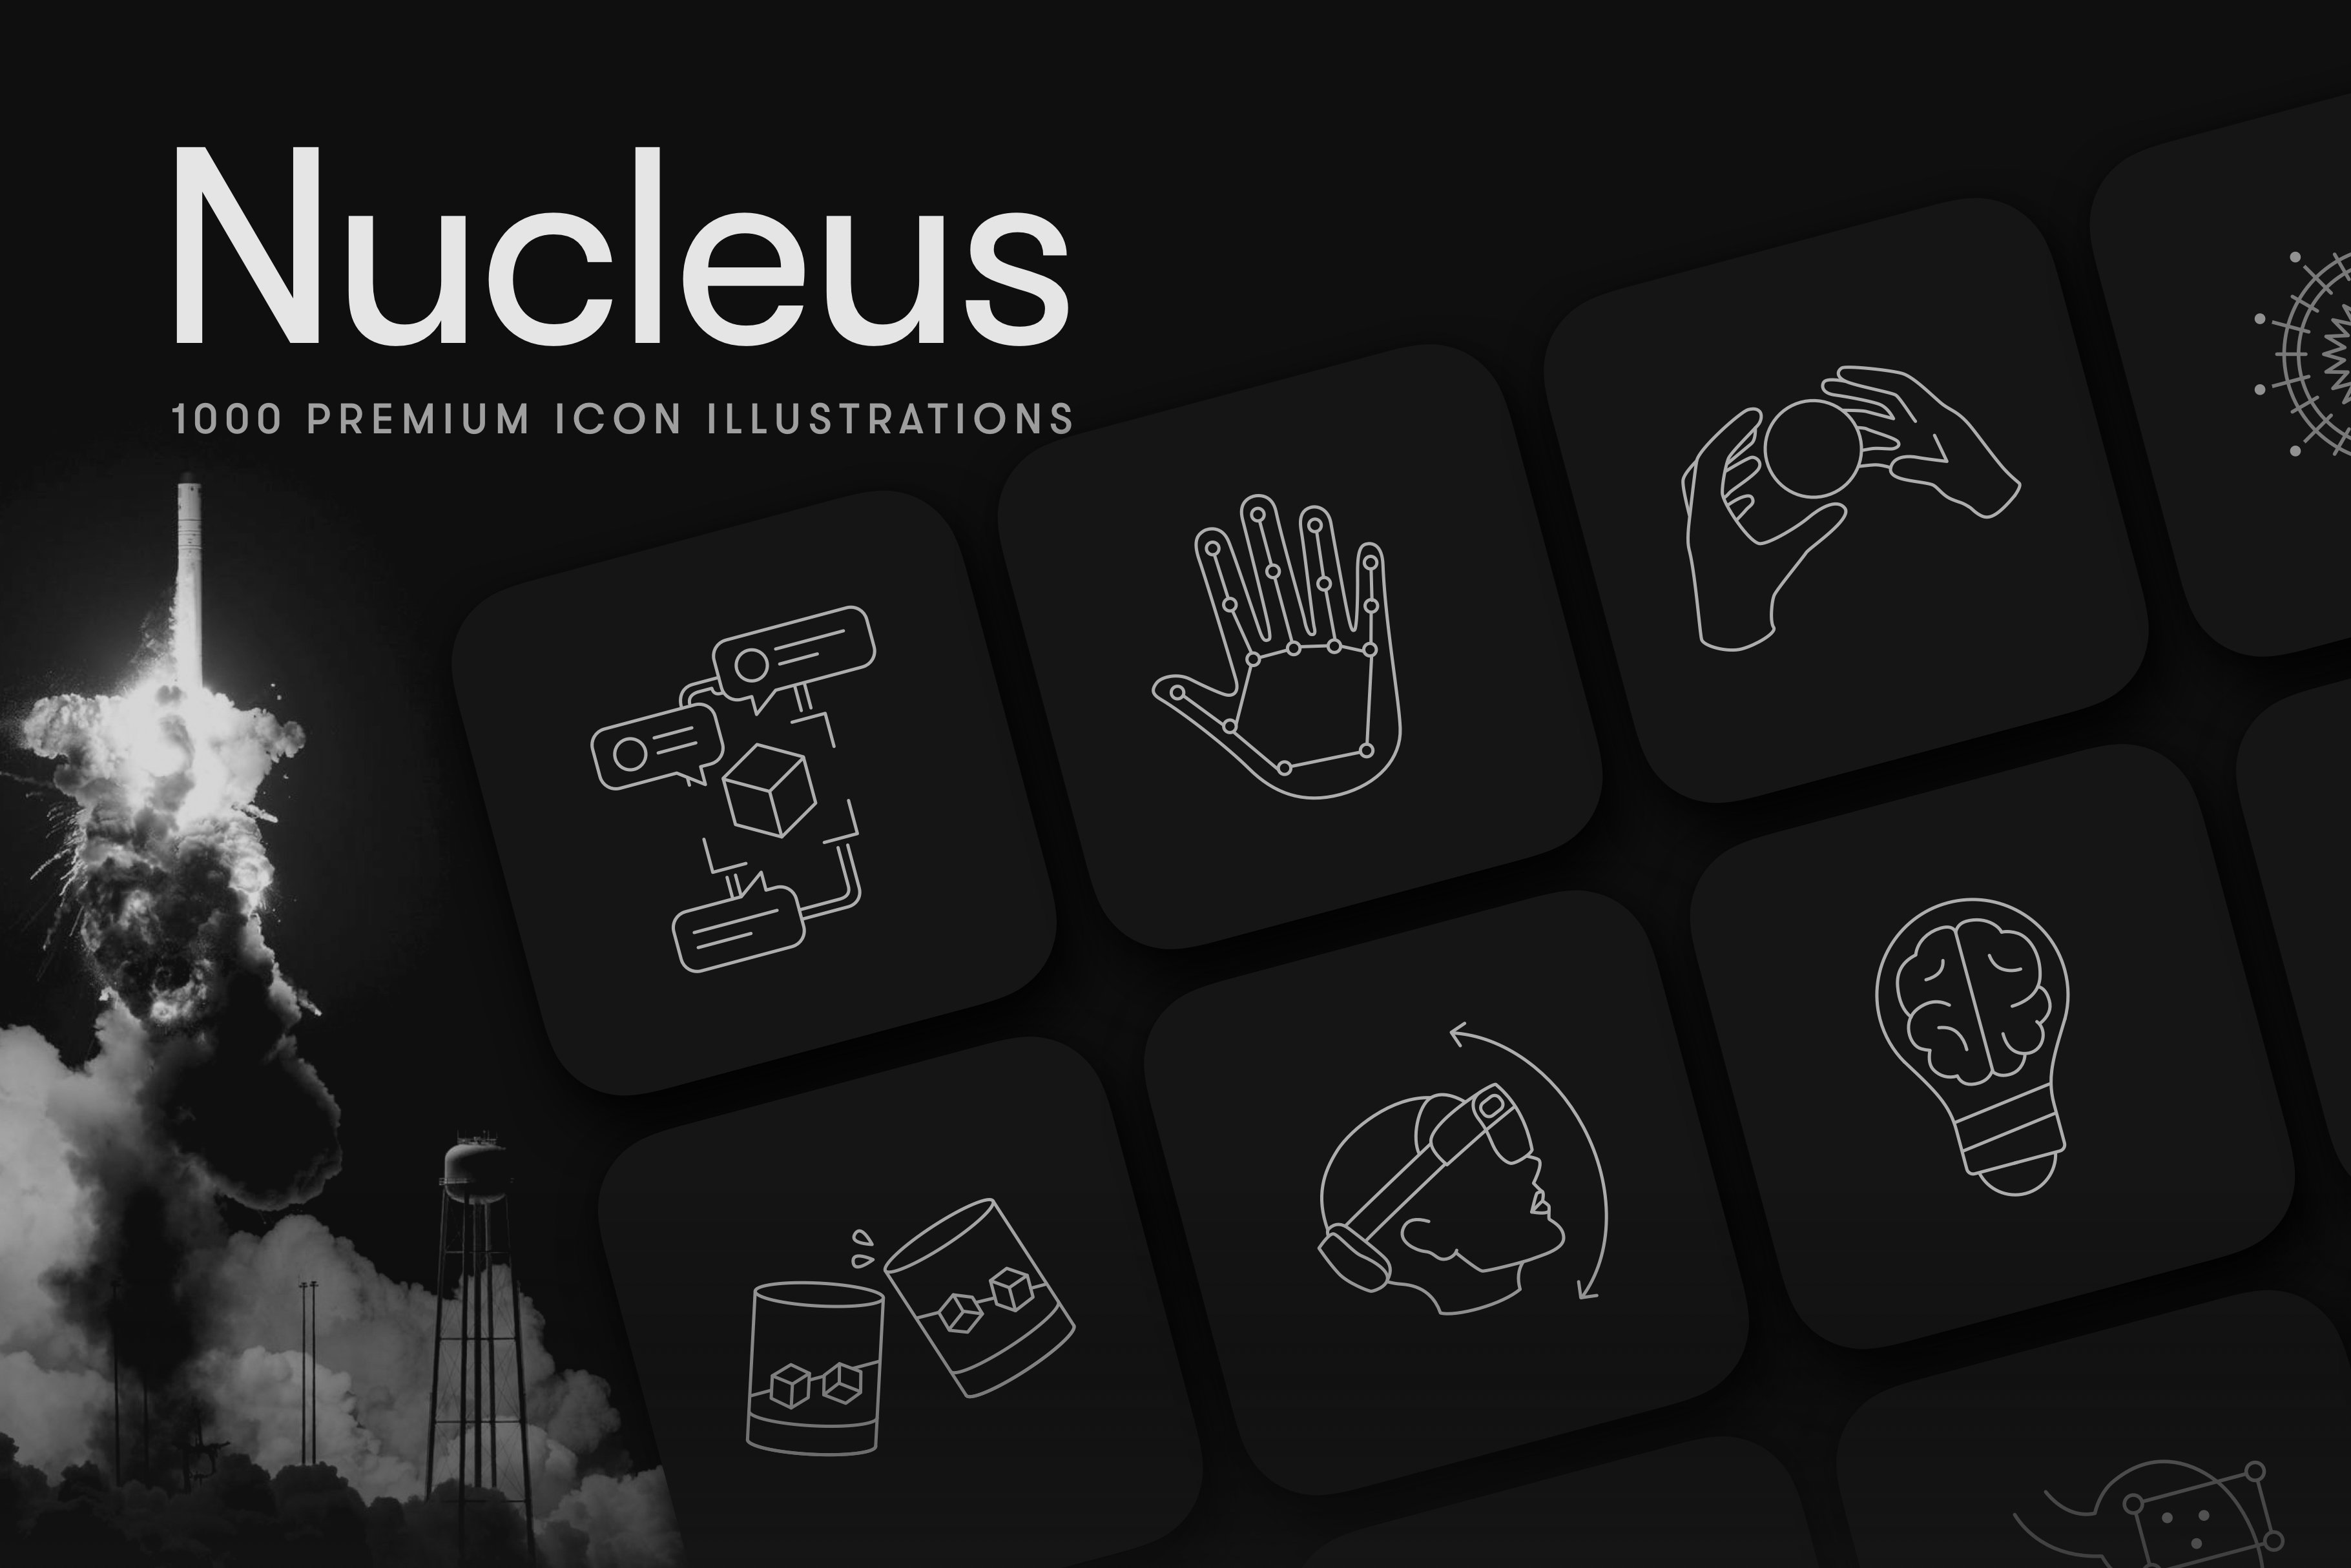 Nucleus Iconset cover image.